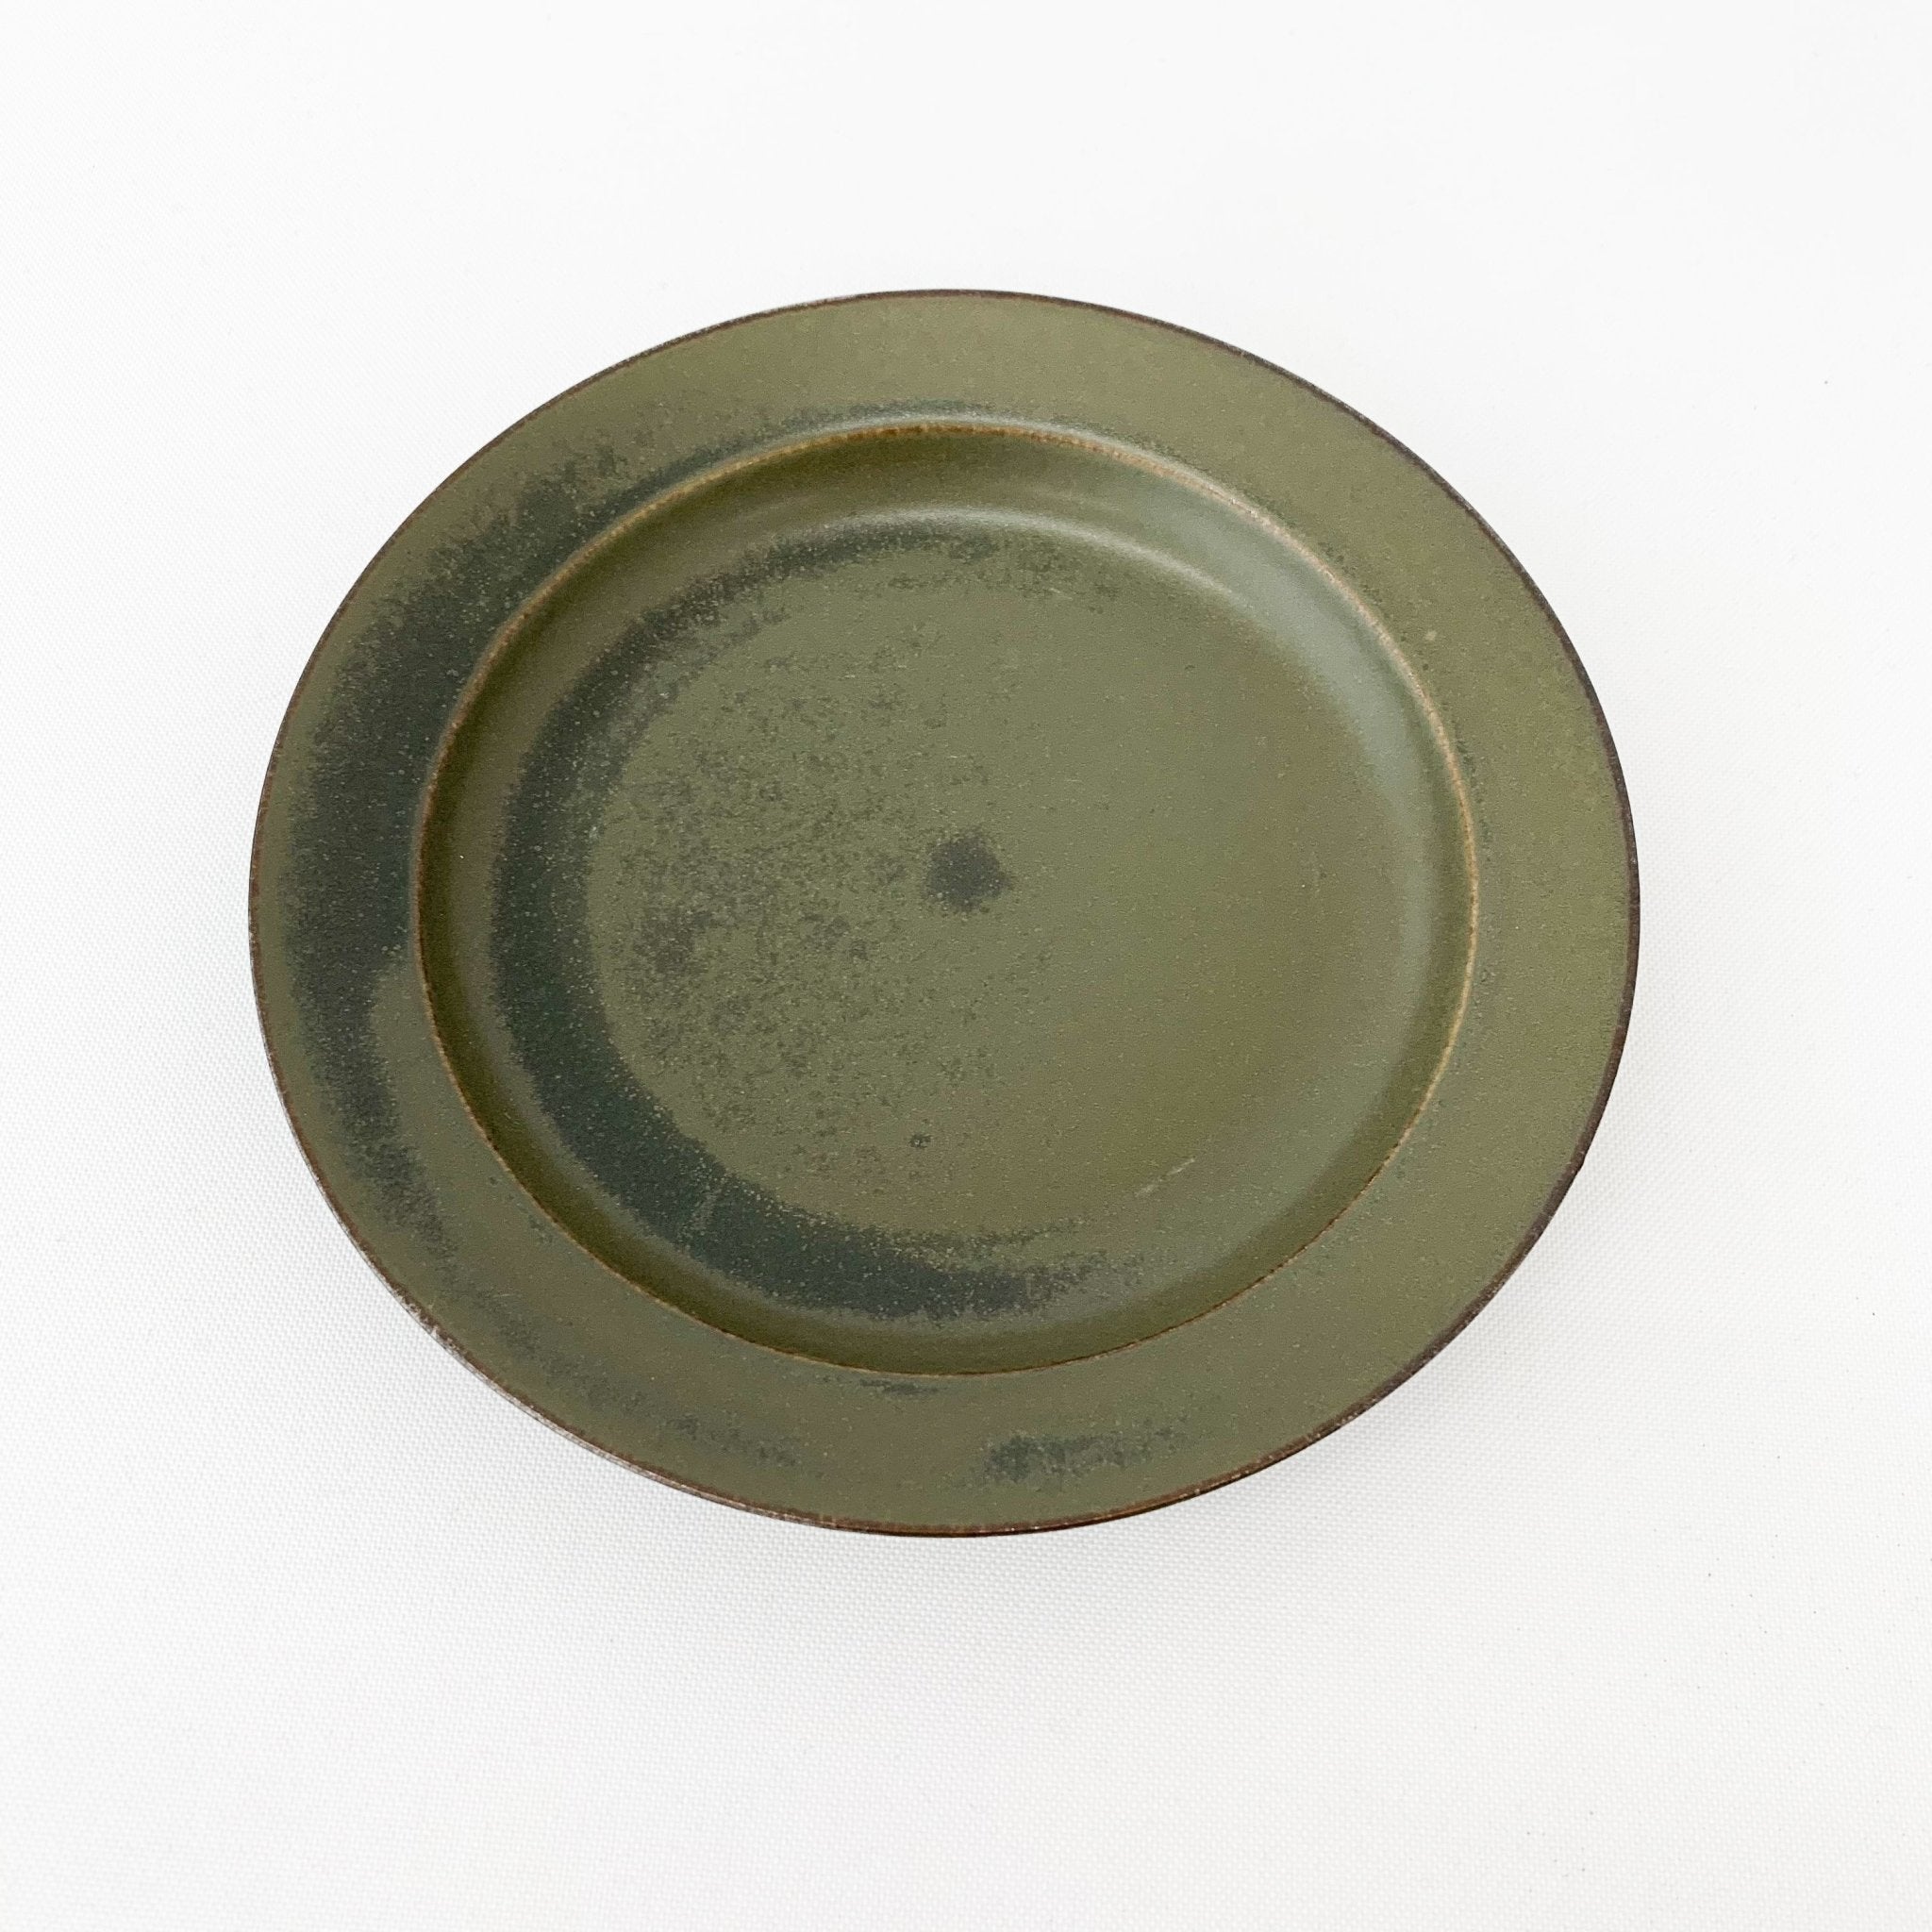 Oxymoron Plate and Cup by Yumiko Iihoshi - tortoise general store